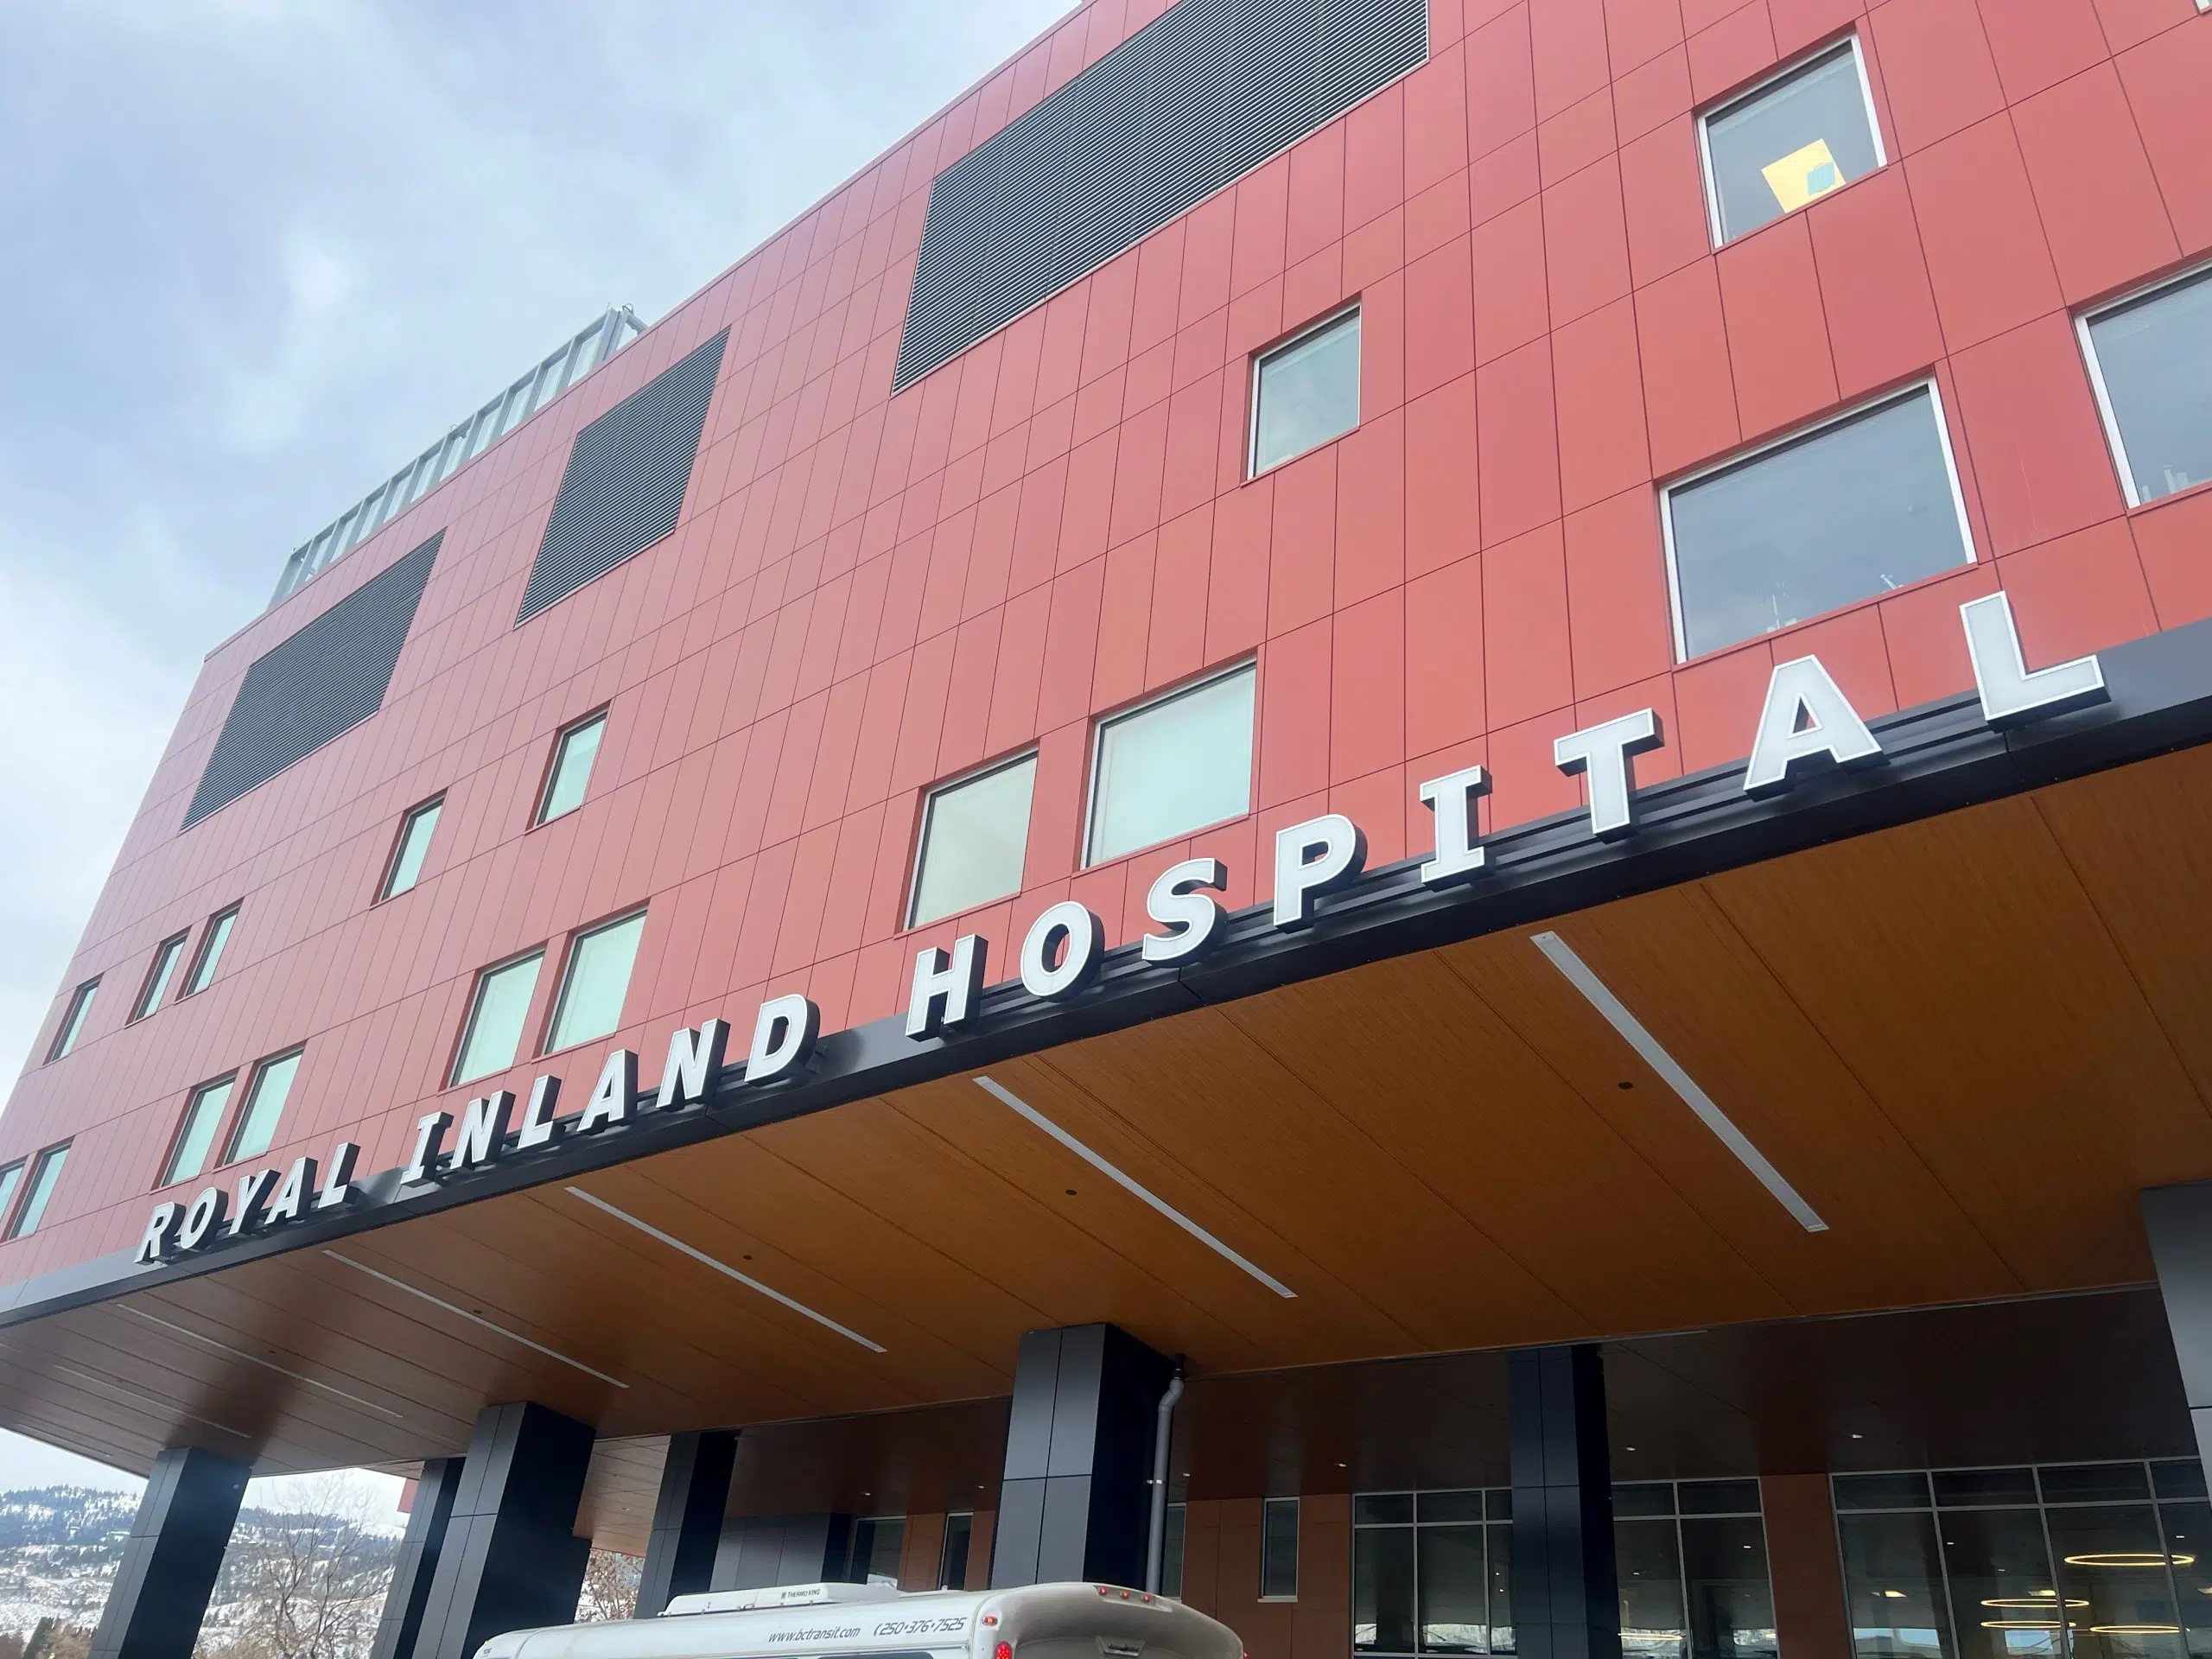 Leading BC Virologist unsurprised by COVID outbreak at Royal Inland Hospital, Ponderosa Lodge